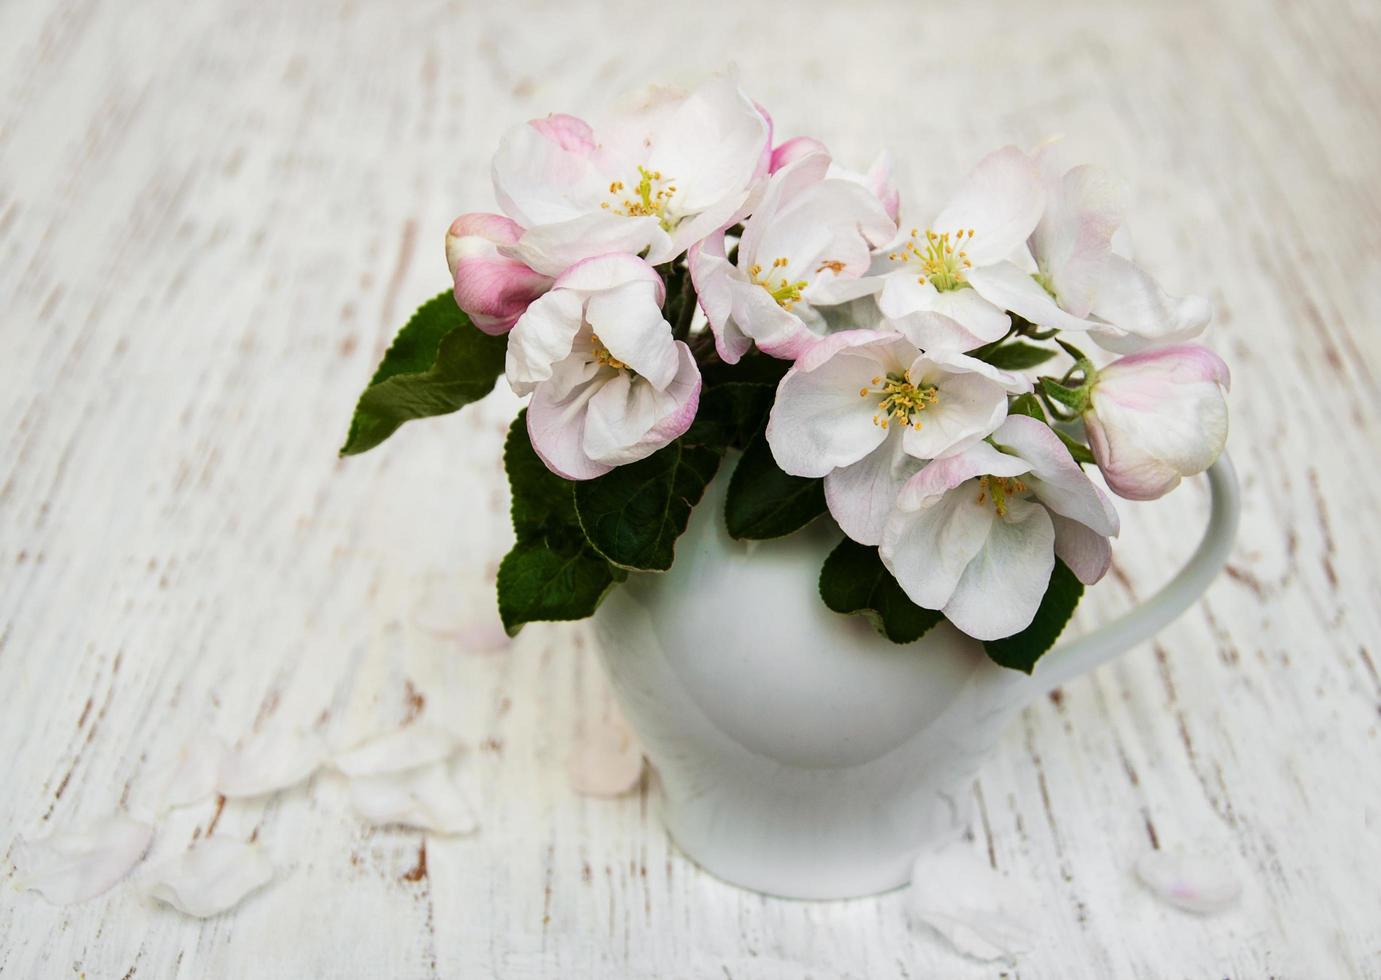 Vase with Apple blossoms photo